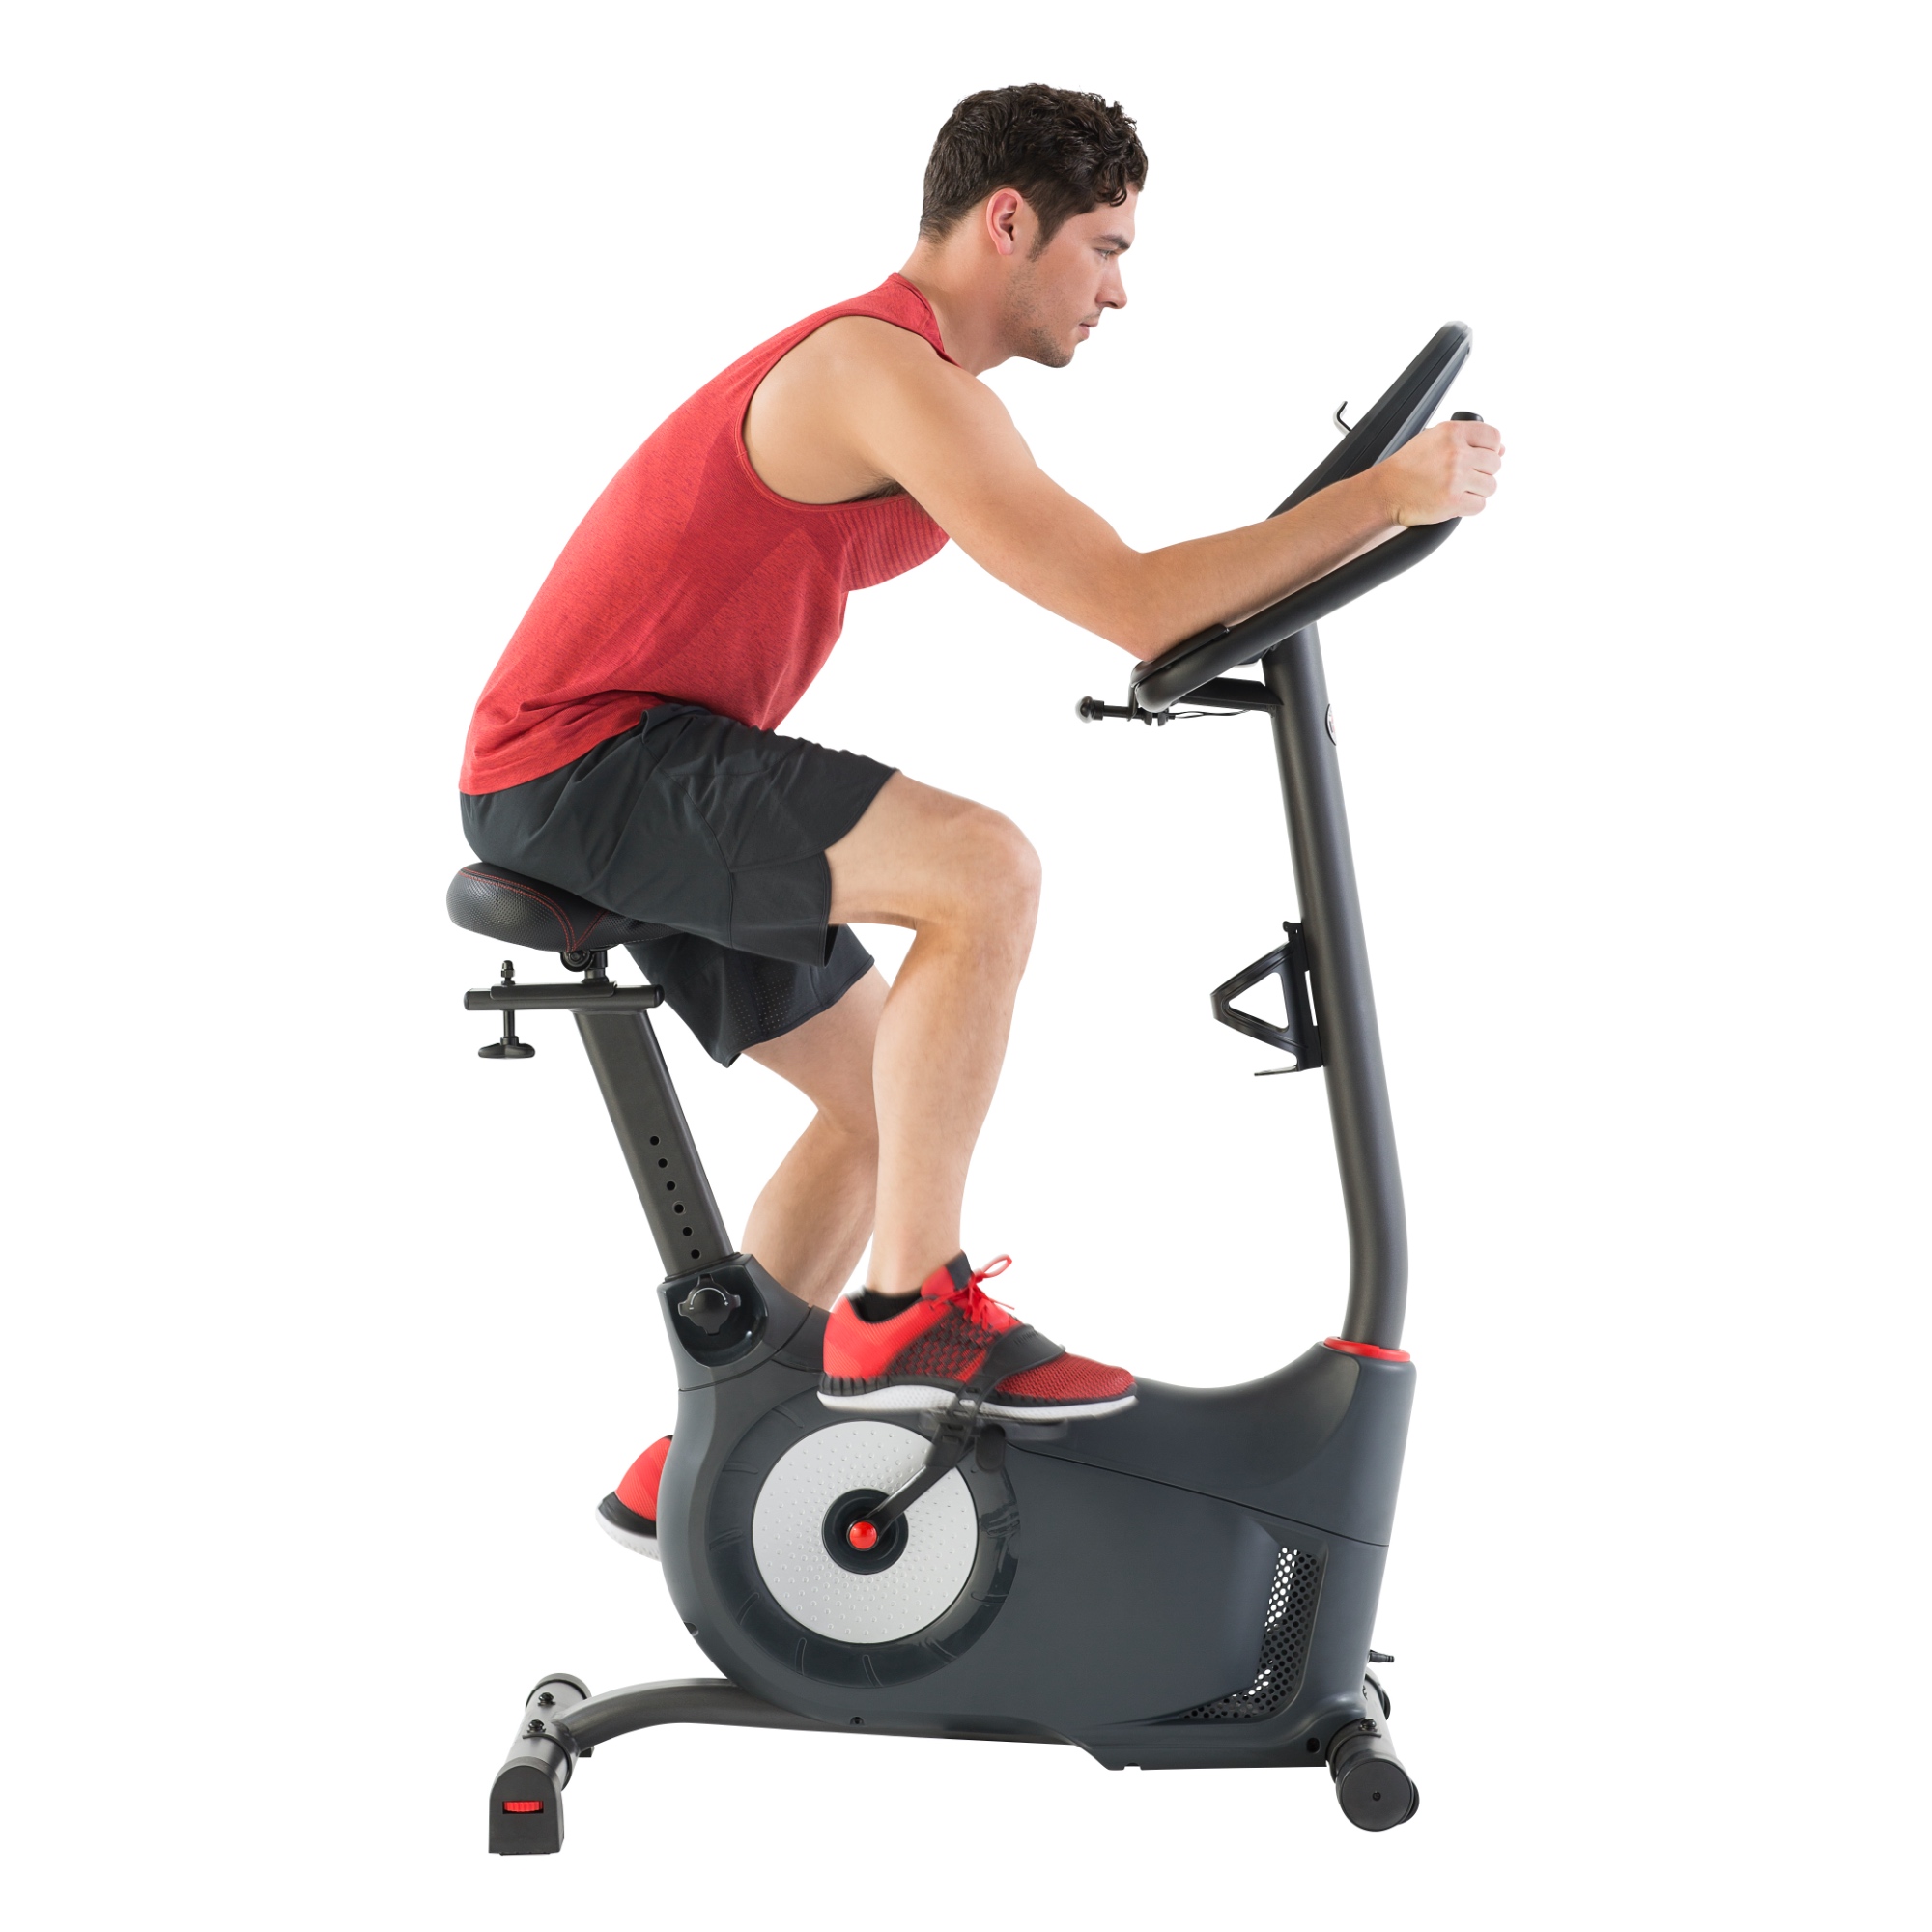 Schwinn Fitness 170 Home Workout Stationary Upright Exercise Bike w/ Explore the World Compatibility - image 12 of 14